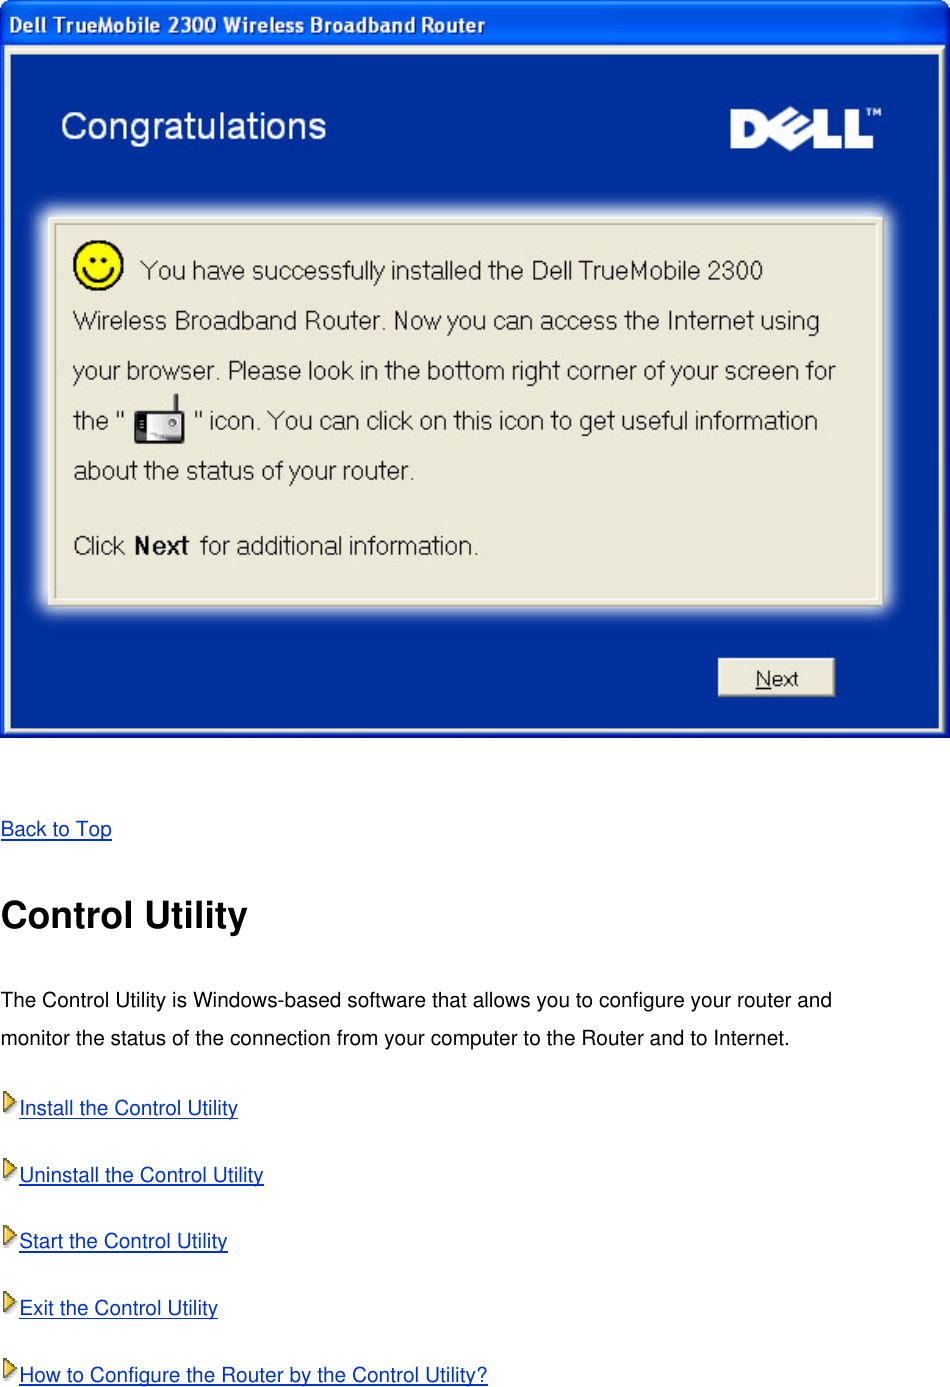   Back to Top  Control Utility The Control Utility is Windows-based software that allows you to configure your router and monitor the status of the connection from your computer to the Router and to Internet. Install the Control Utility Uninstall the Control Utility Start the Control Utility Exit the Control Utility How to Configure the Router by the Control Utility? 